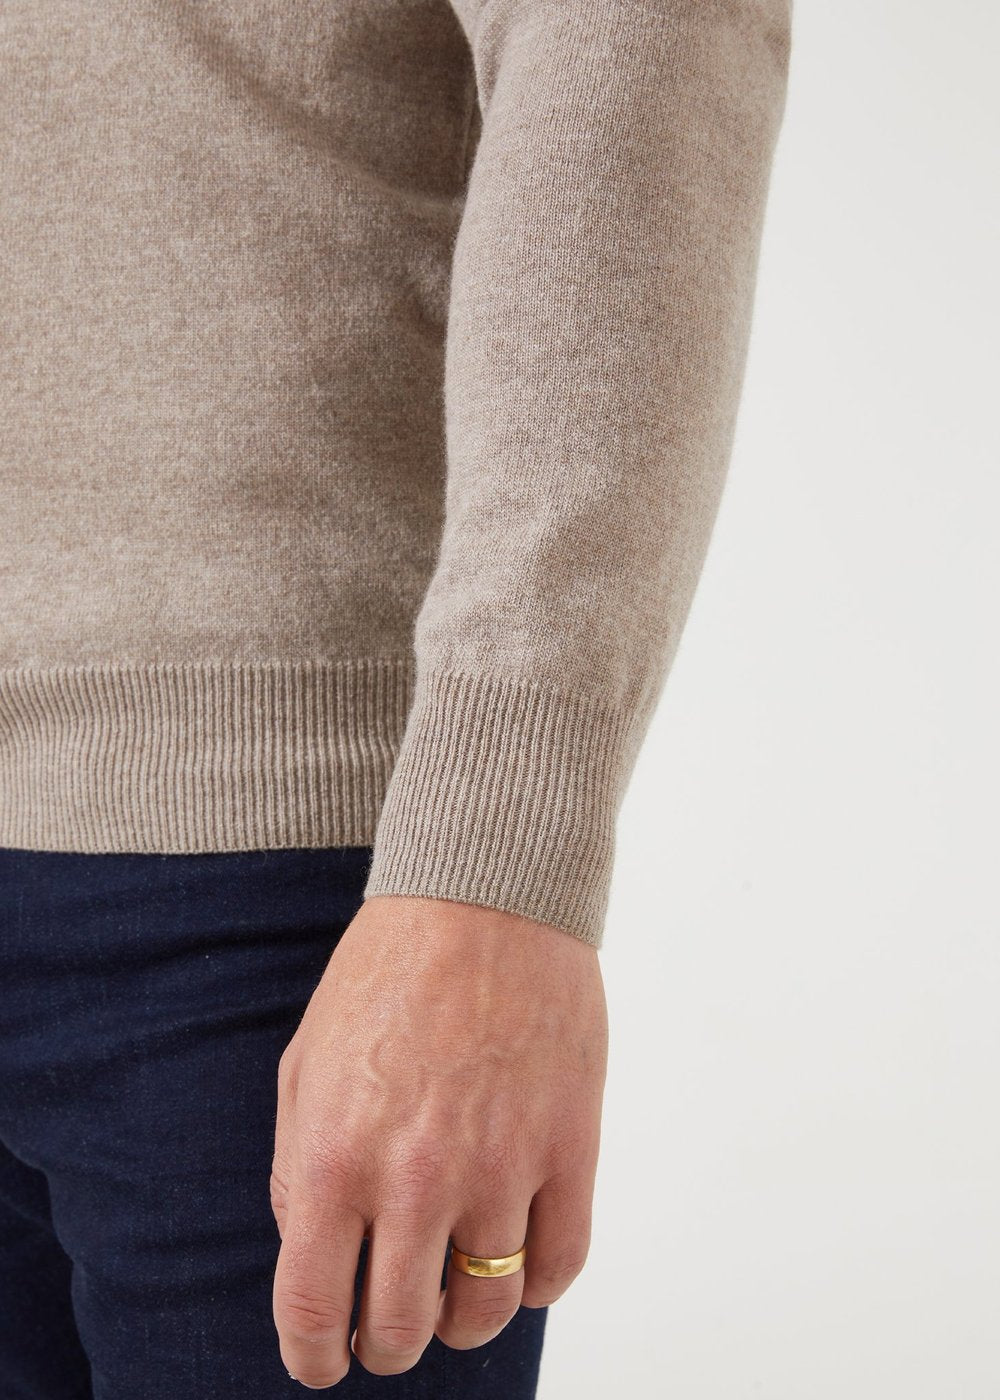 Solid color men's sweater